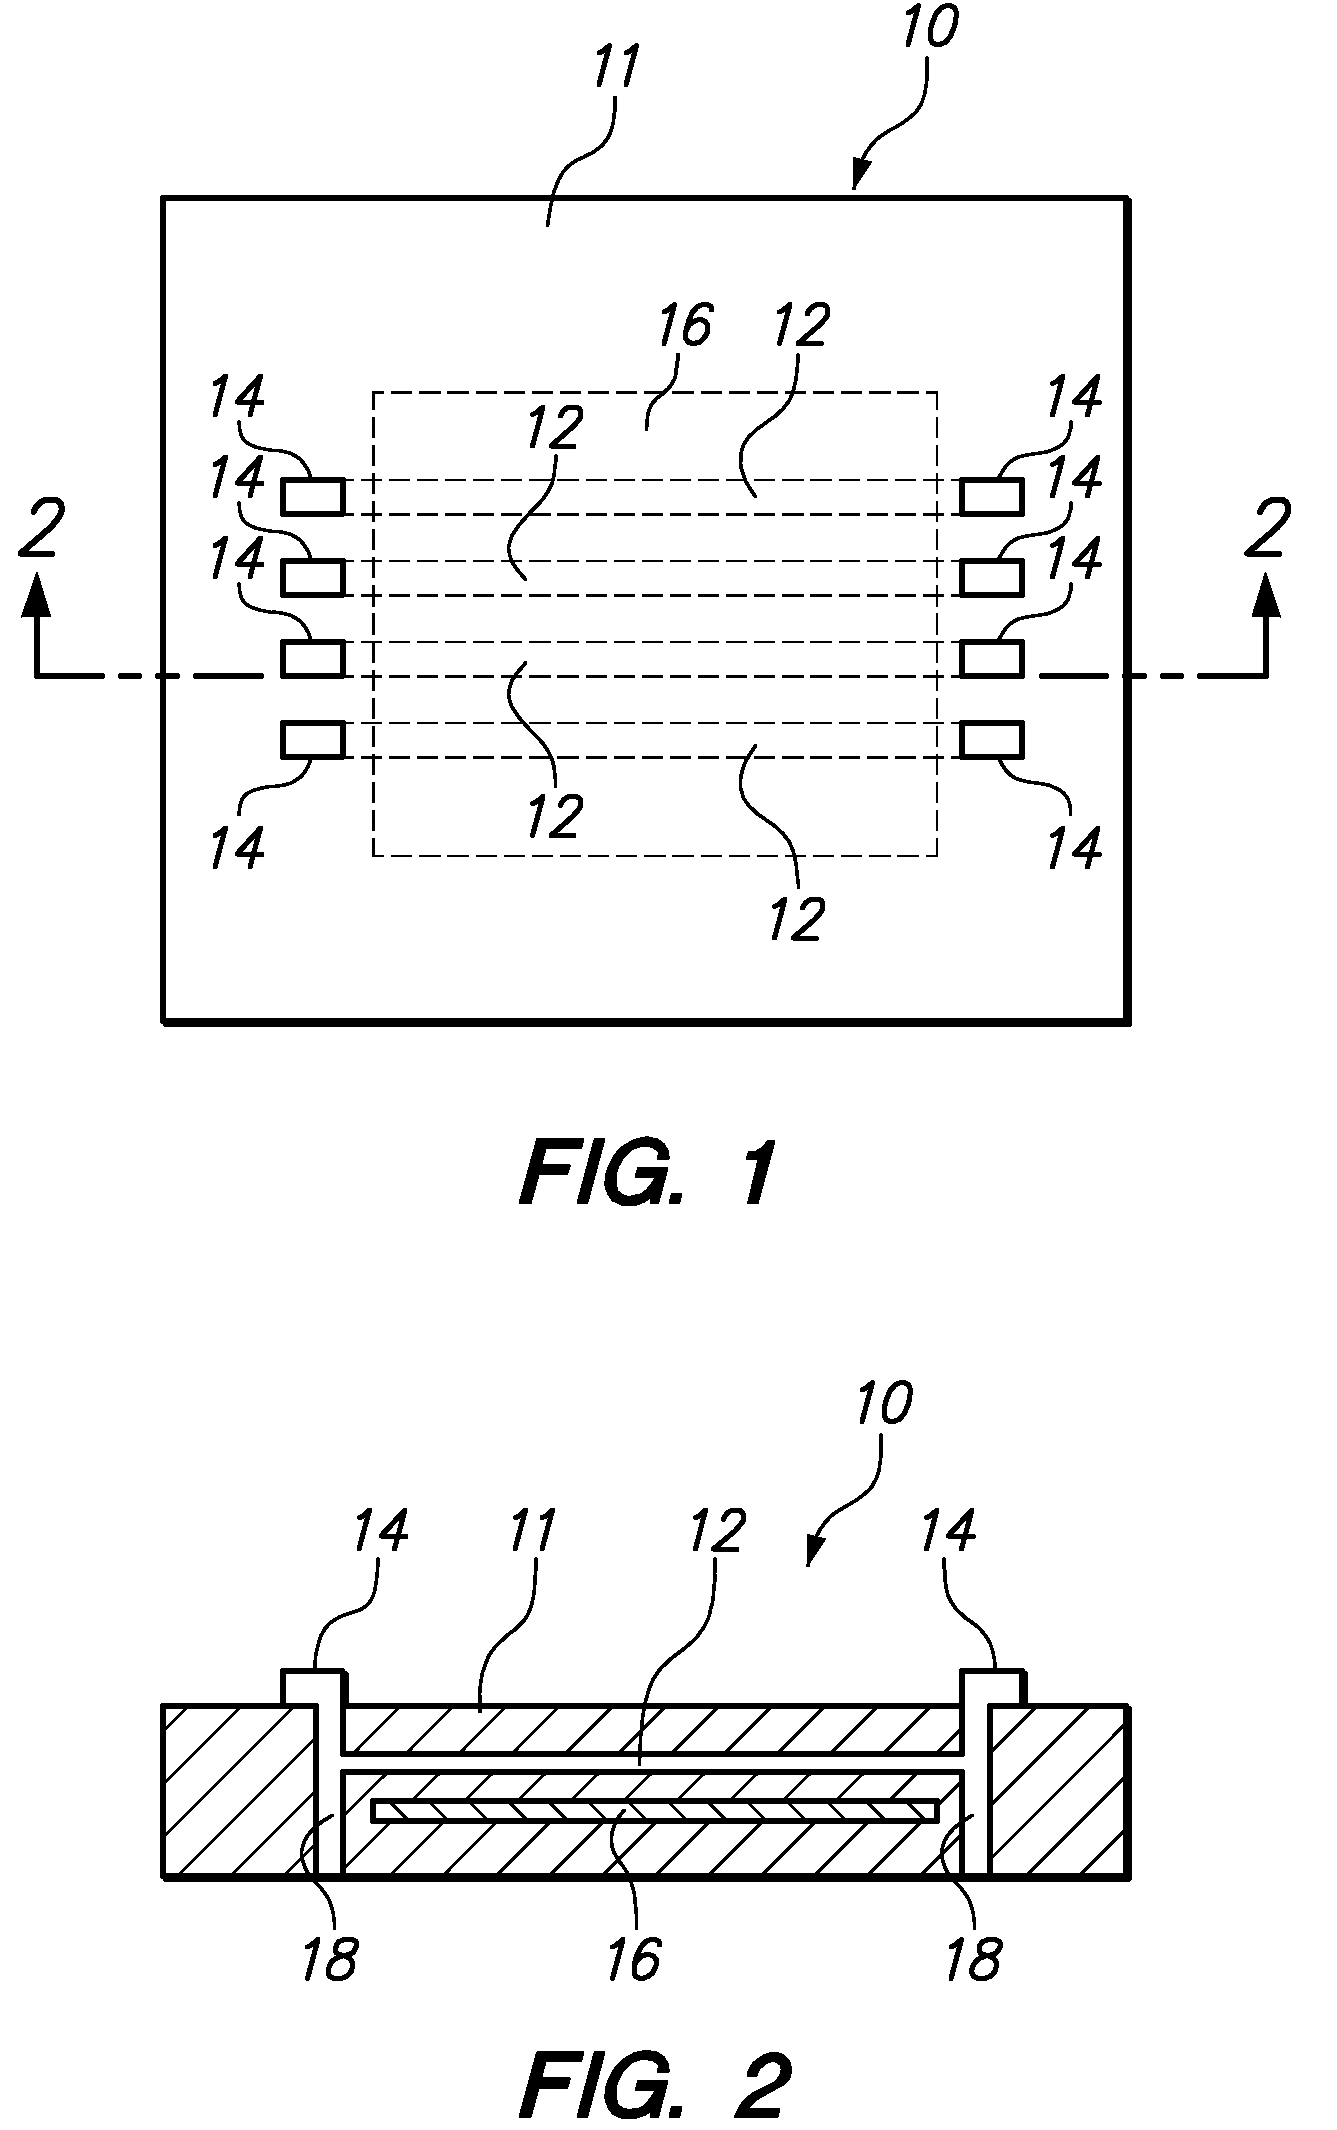 Method for validating printed circuit board materials for high speed applications